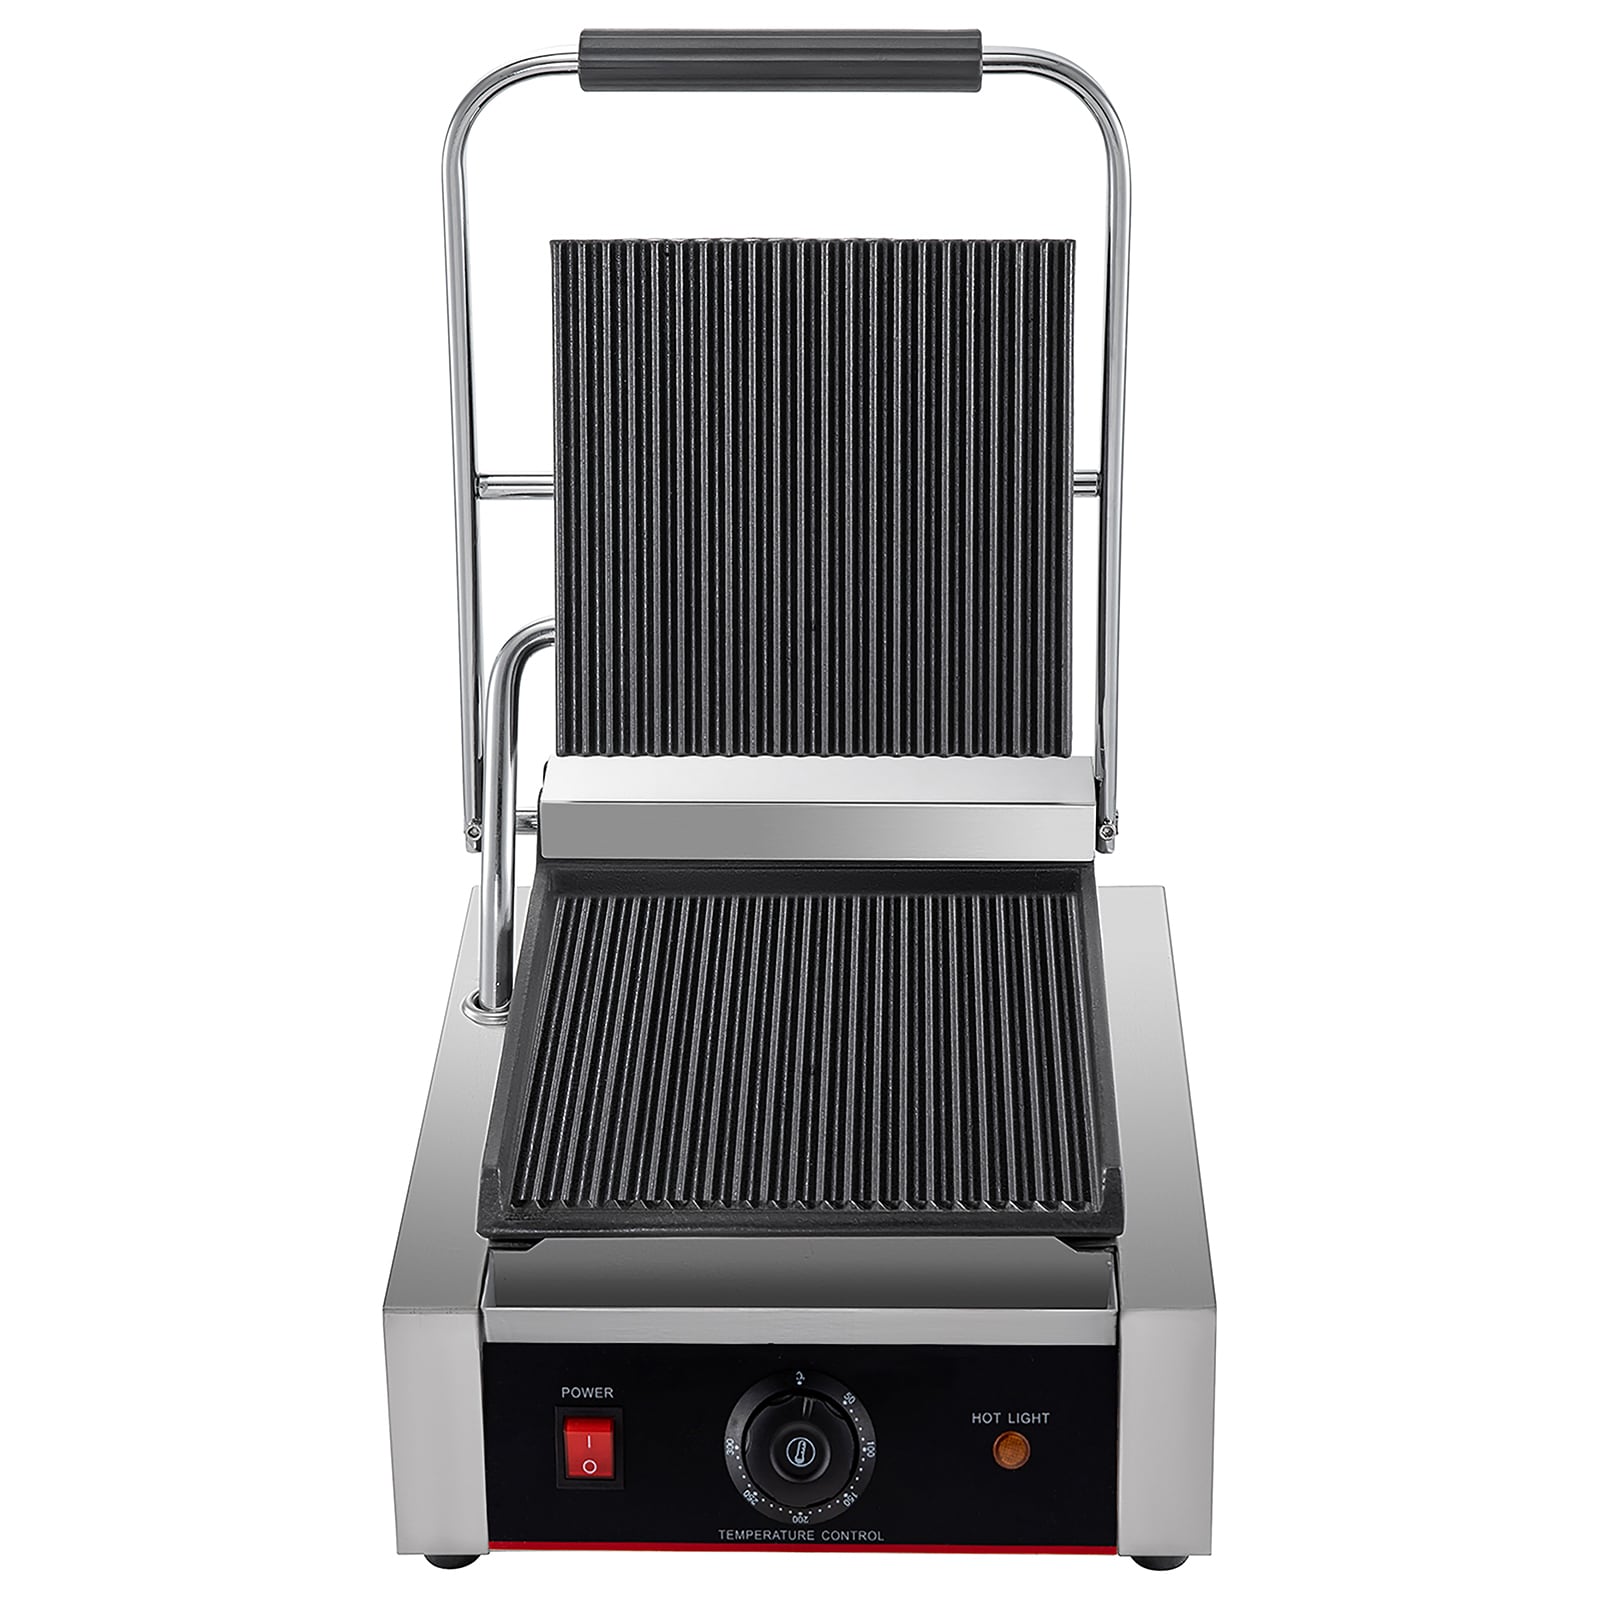 VEVOR Commercial Sandwich Panini Press 3600-Watt Non-Stick Electric Griddle with Double Flat Plates for Hamburgers, Silver